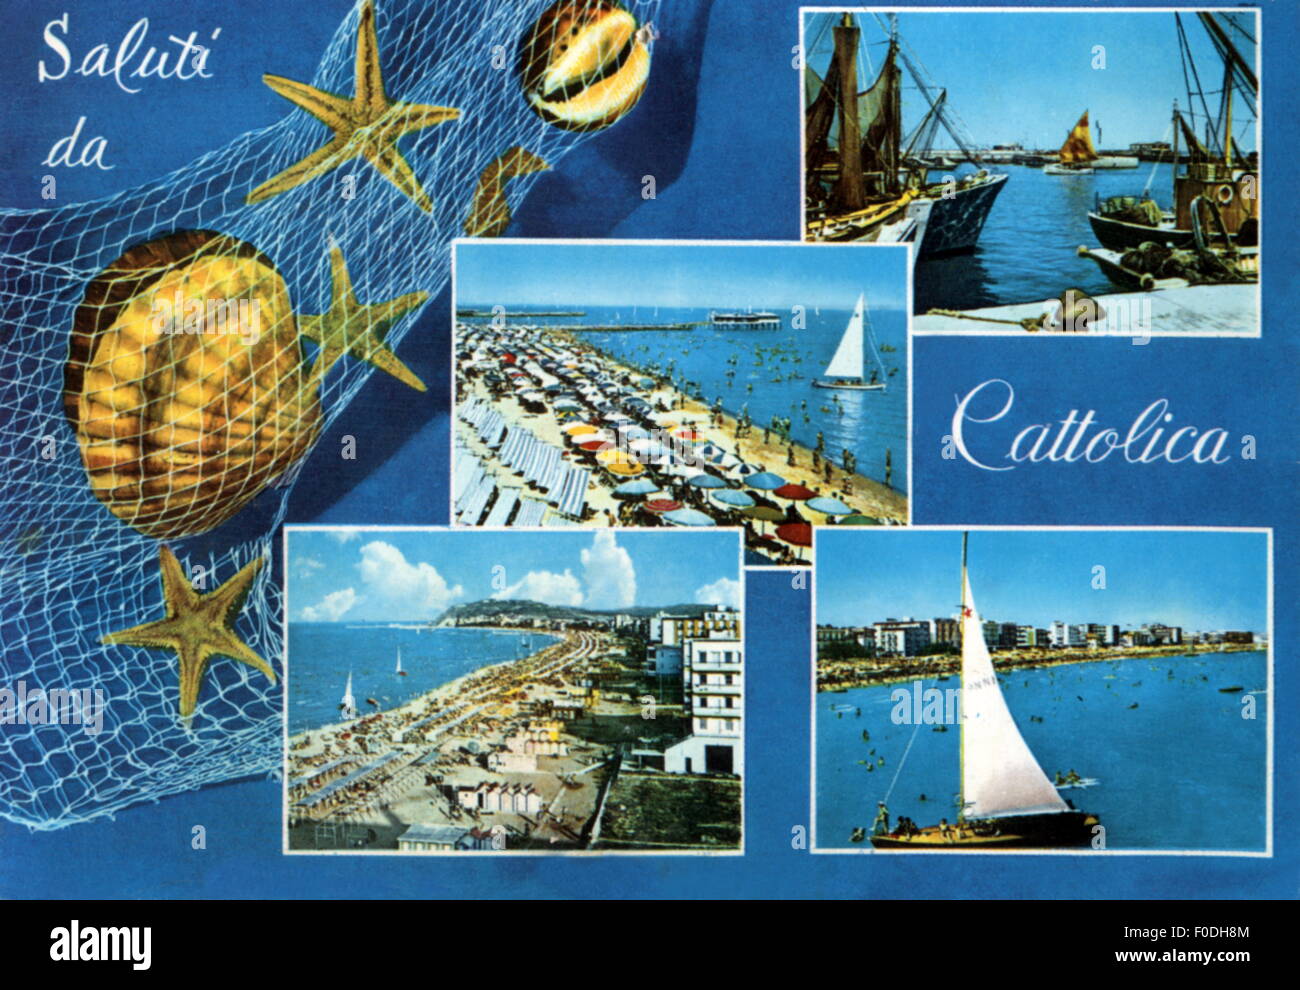 geography / travel, Italy, Cattolica, city views / cityscapes, promenade, picture postcard, circa 1964, Additional-Rights-Clearences-Not Available Stock Photo